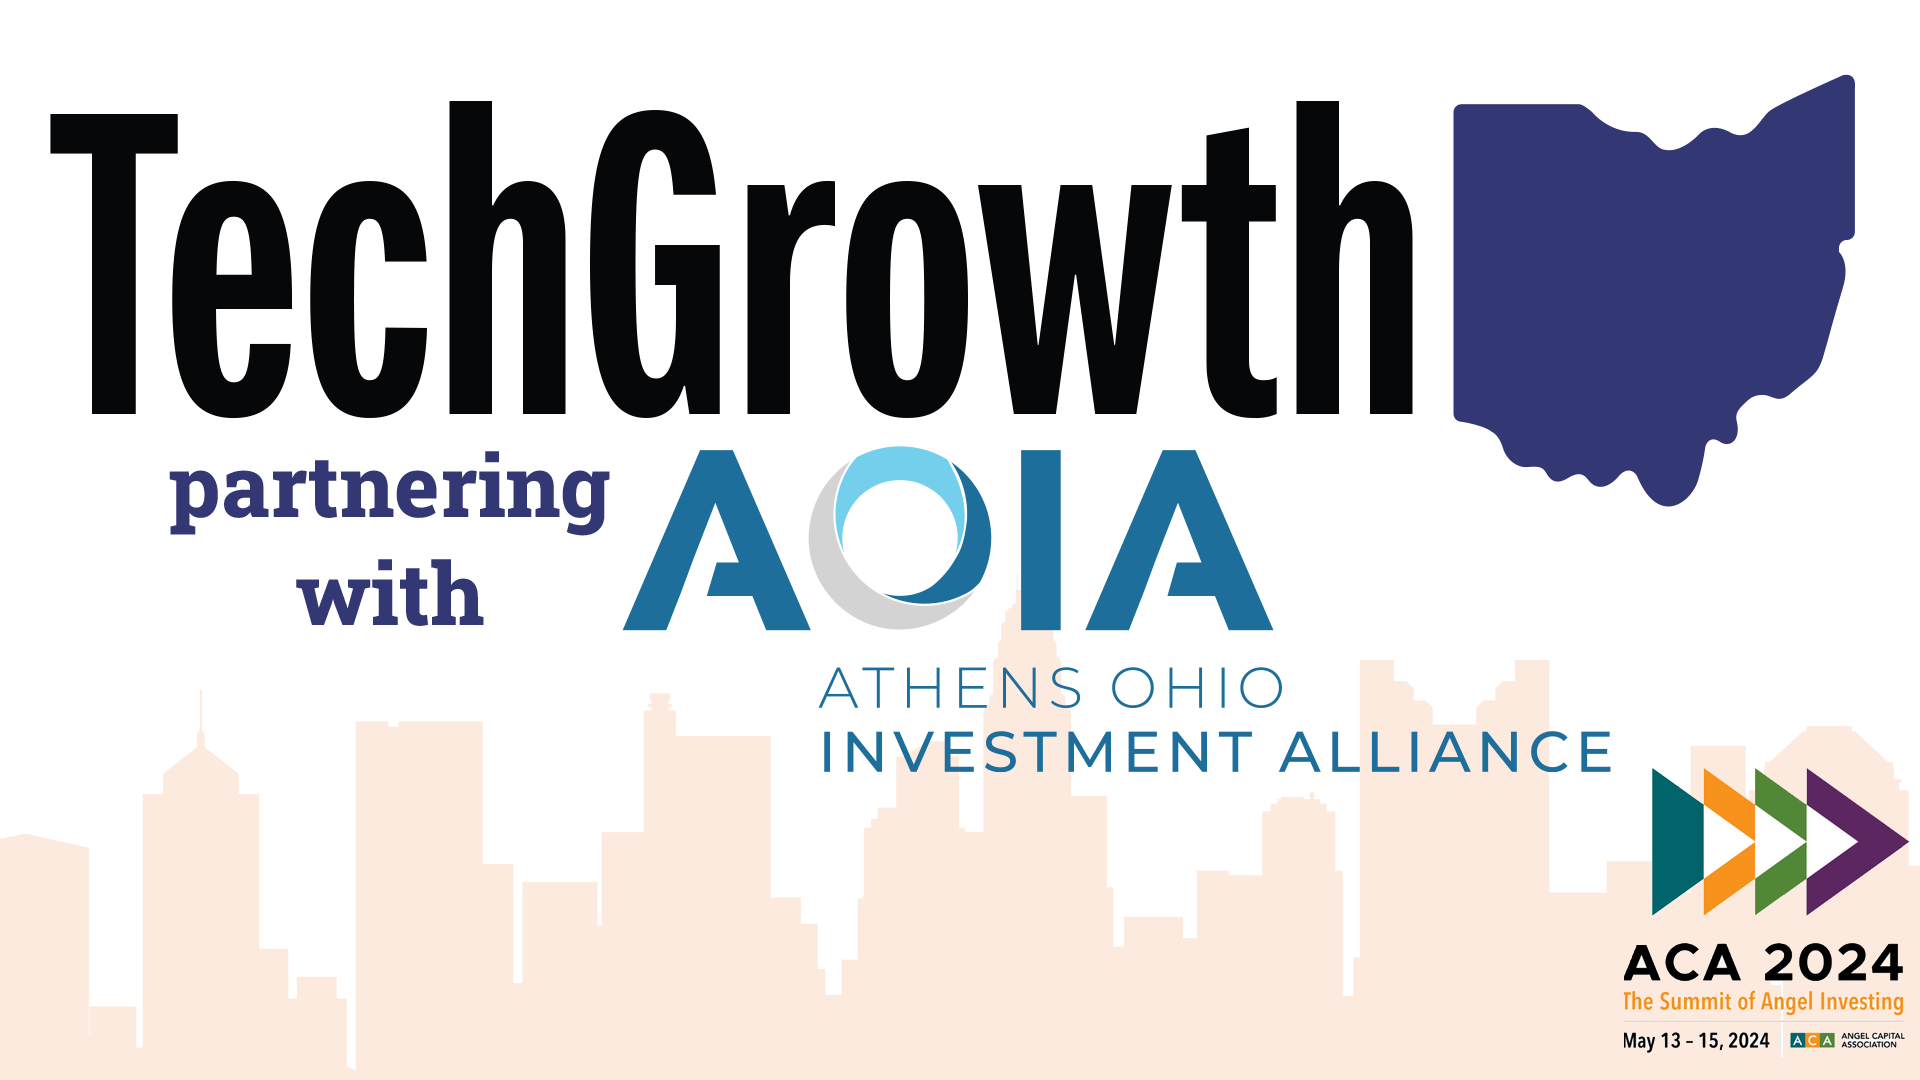 TechGrowth and AOIA ACA 2024 The Summit of Angel Investing